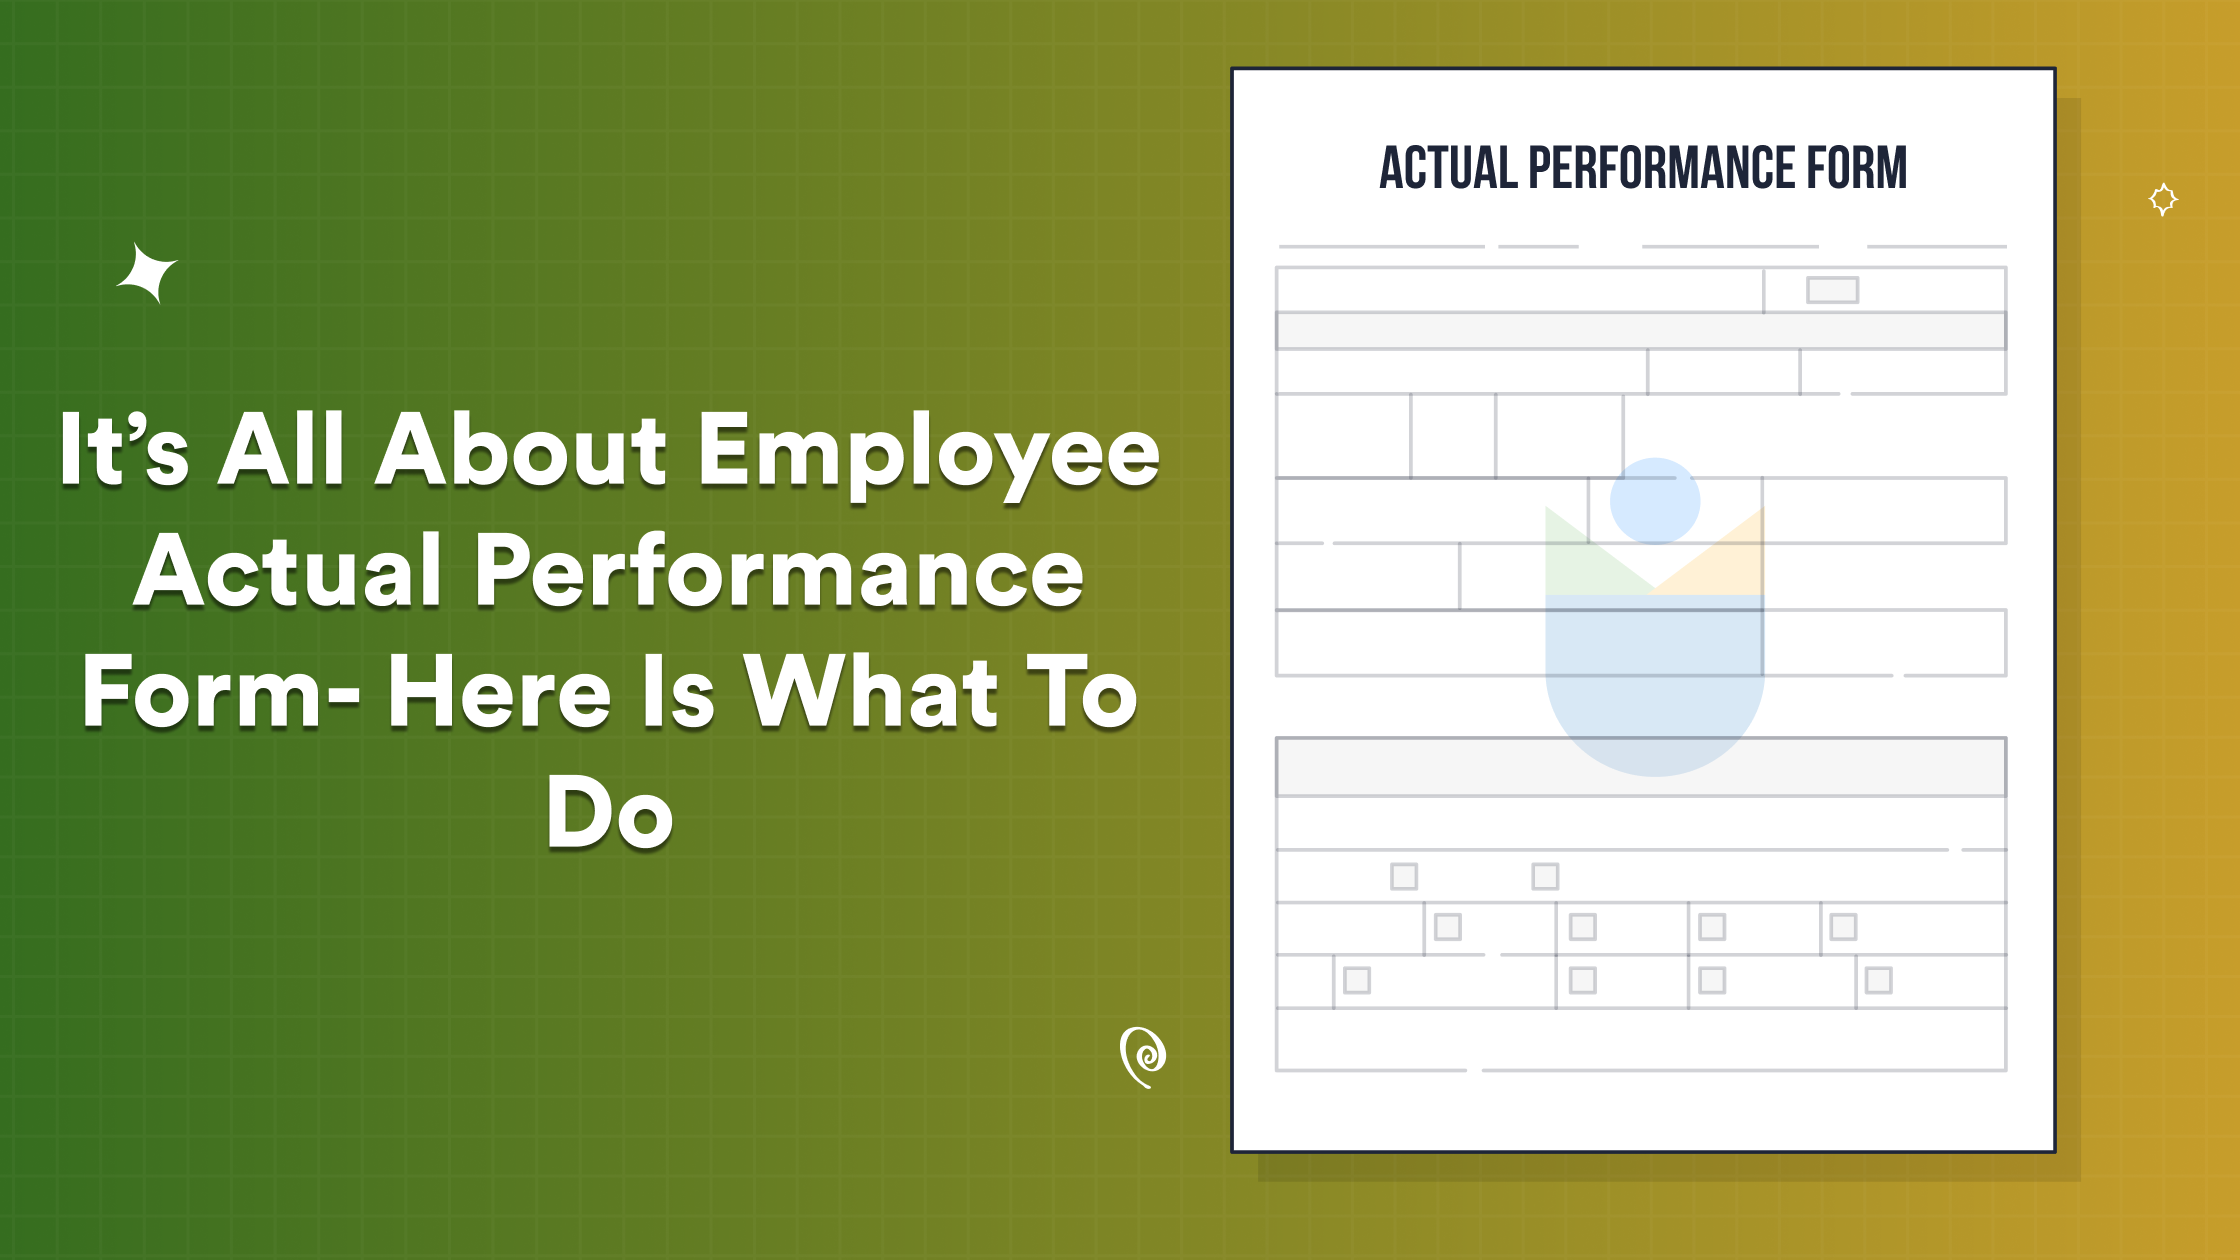 Employee Actual Performance Form